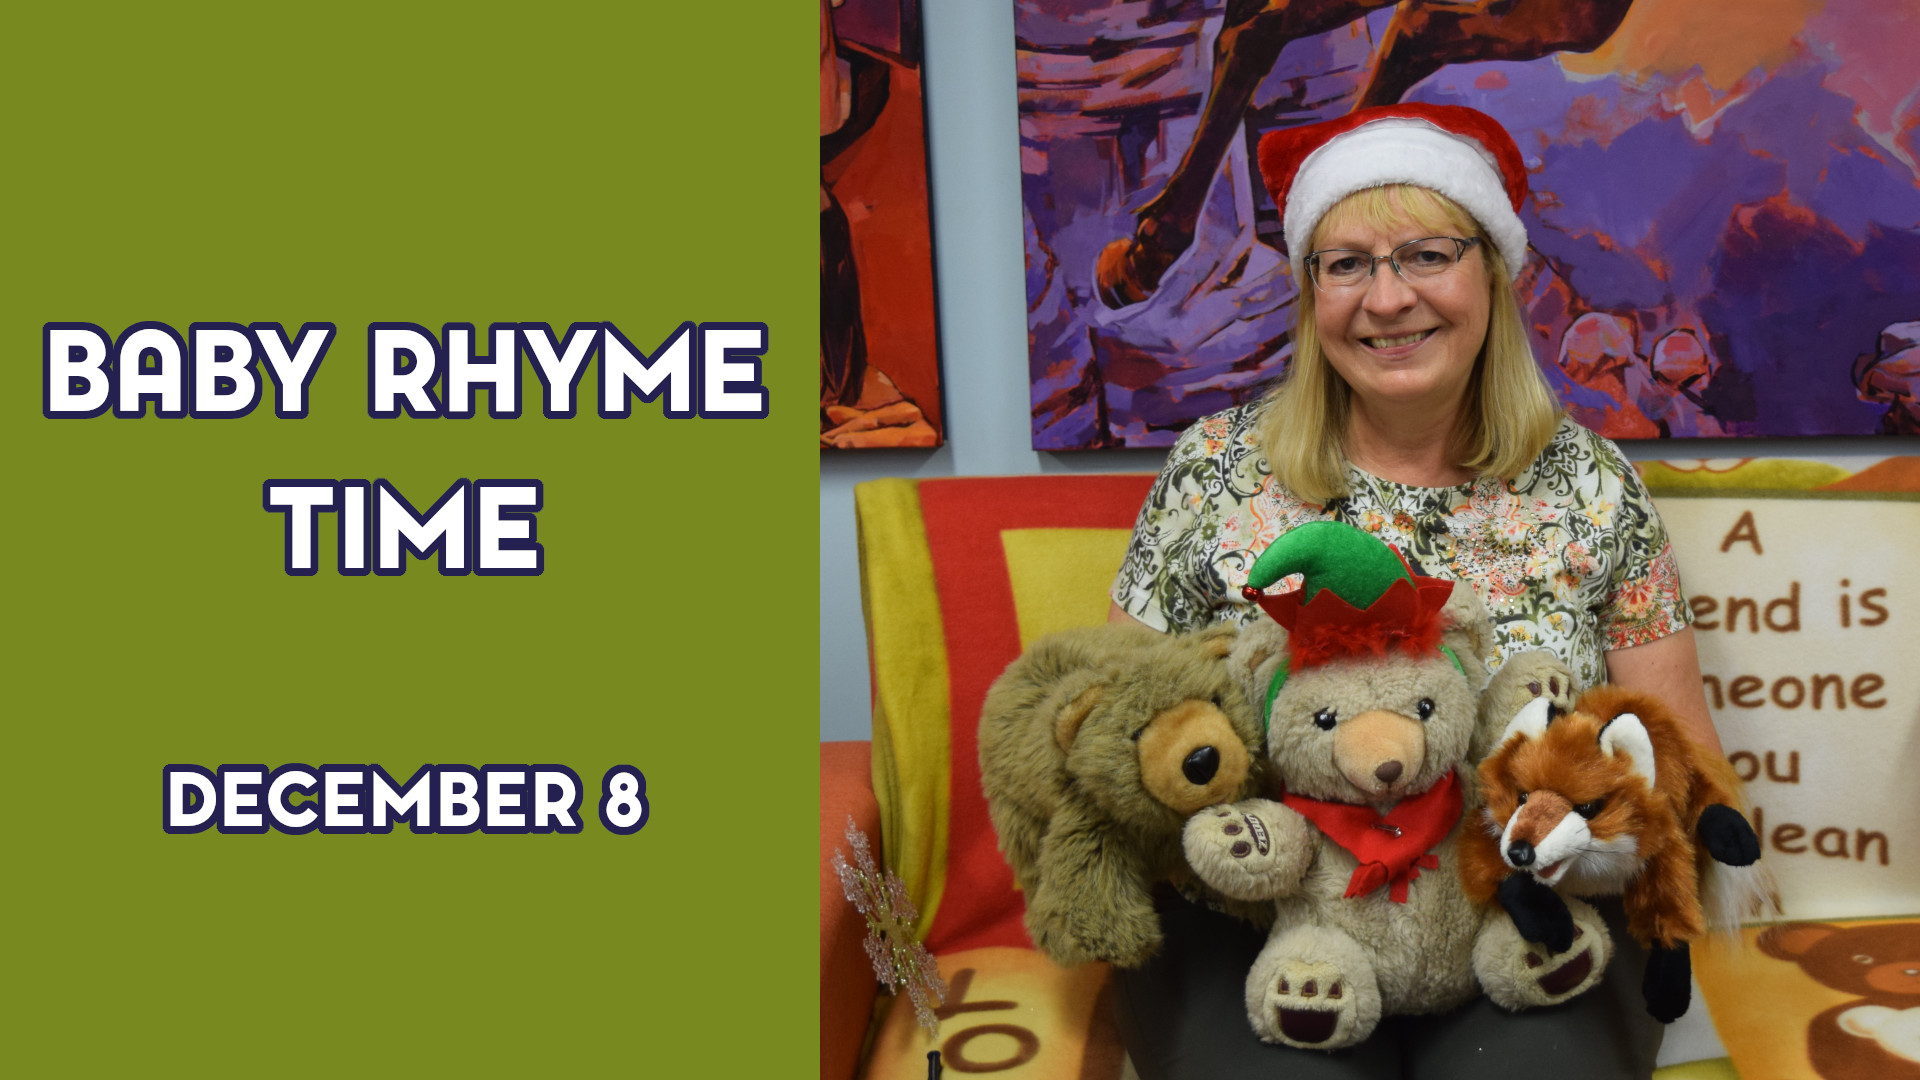 A woman holds stuffed animals next to the text "Baby Rhyme Time December 8"